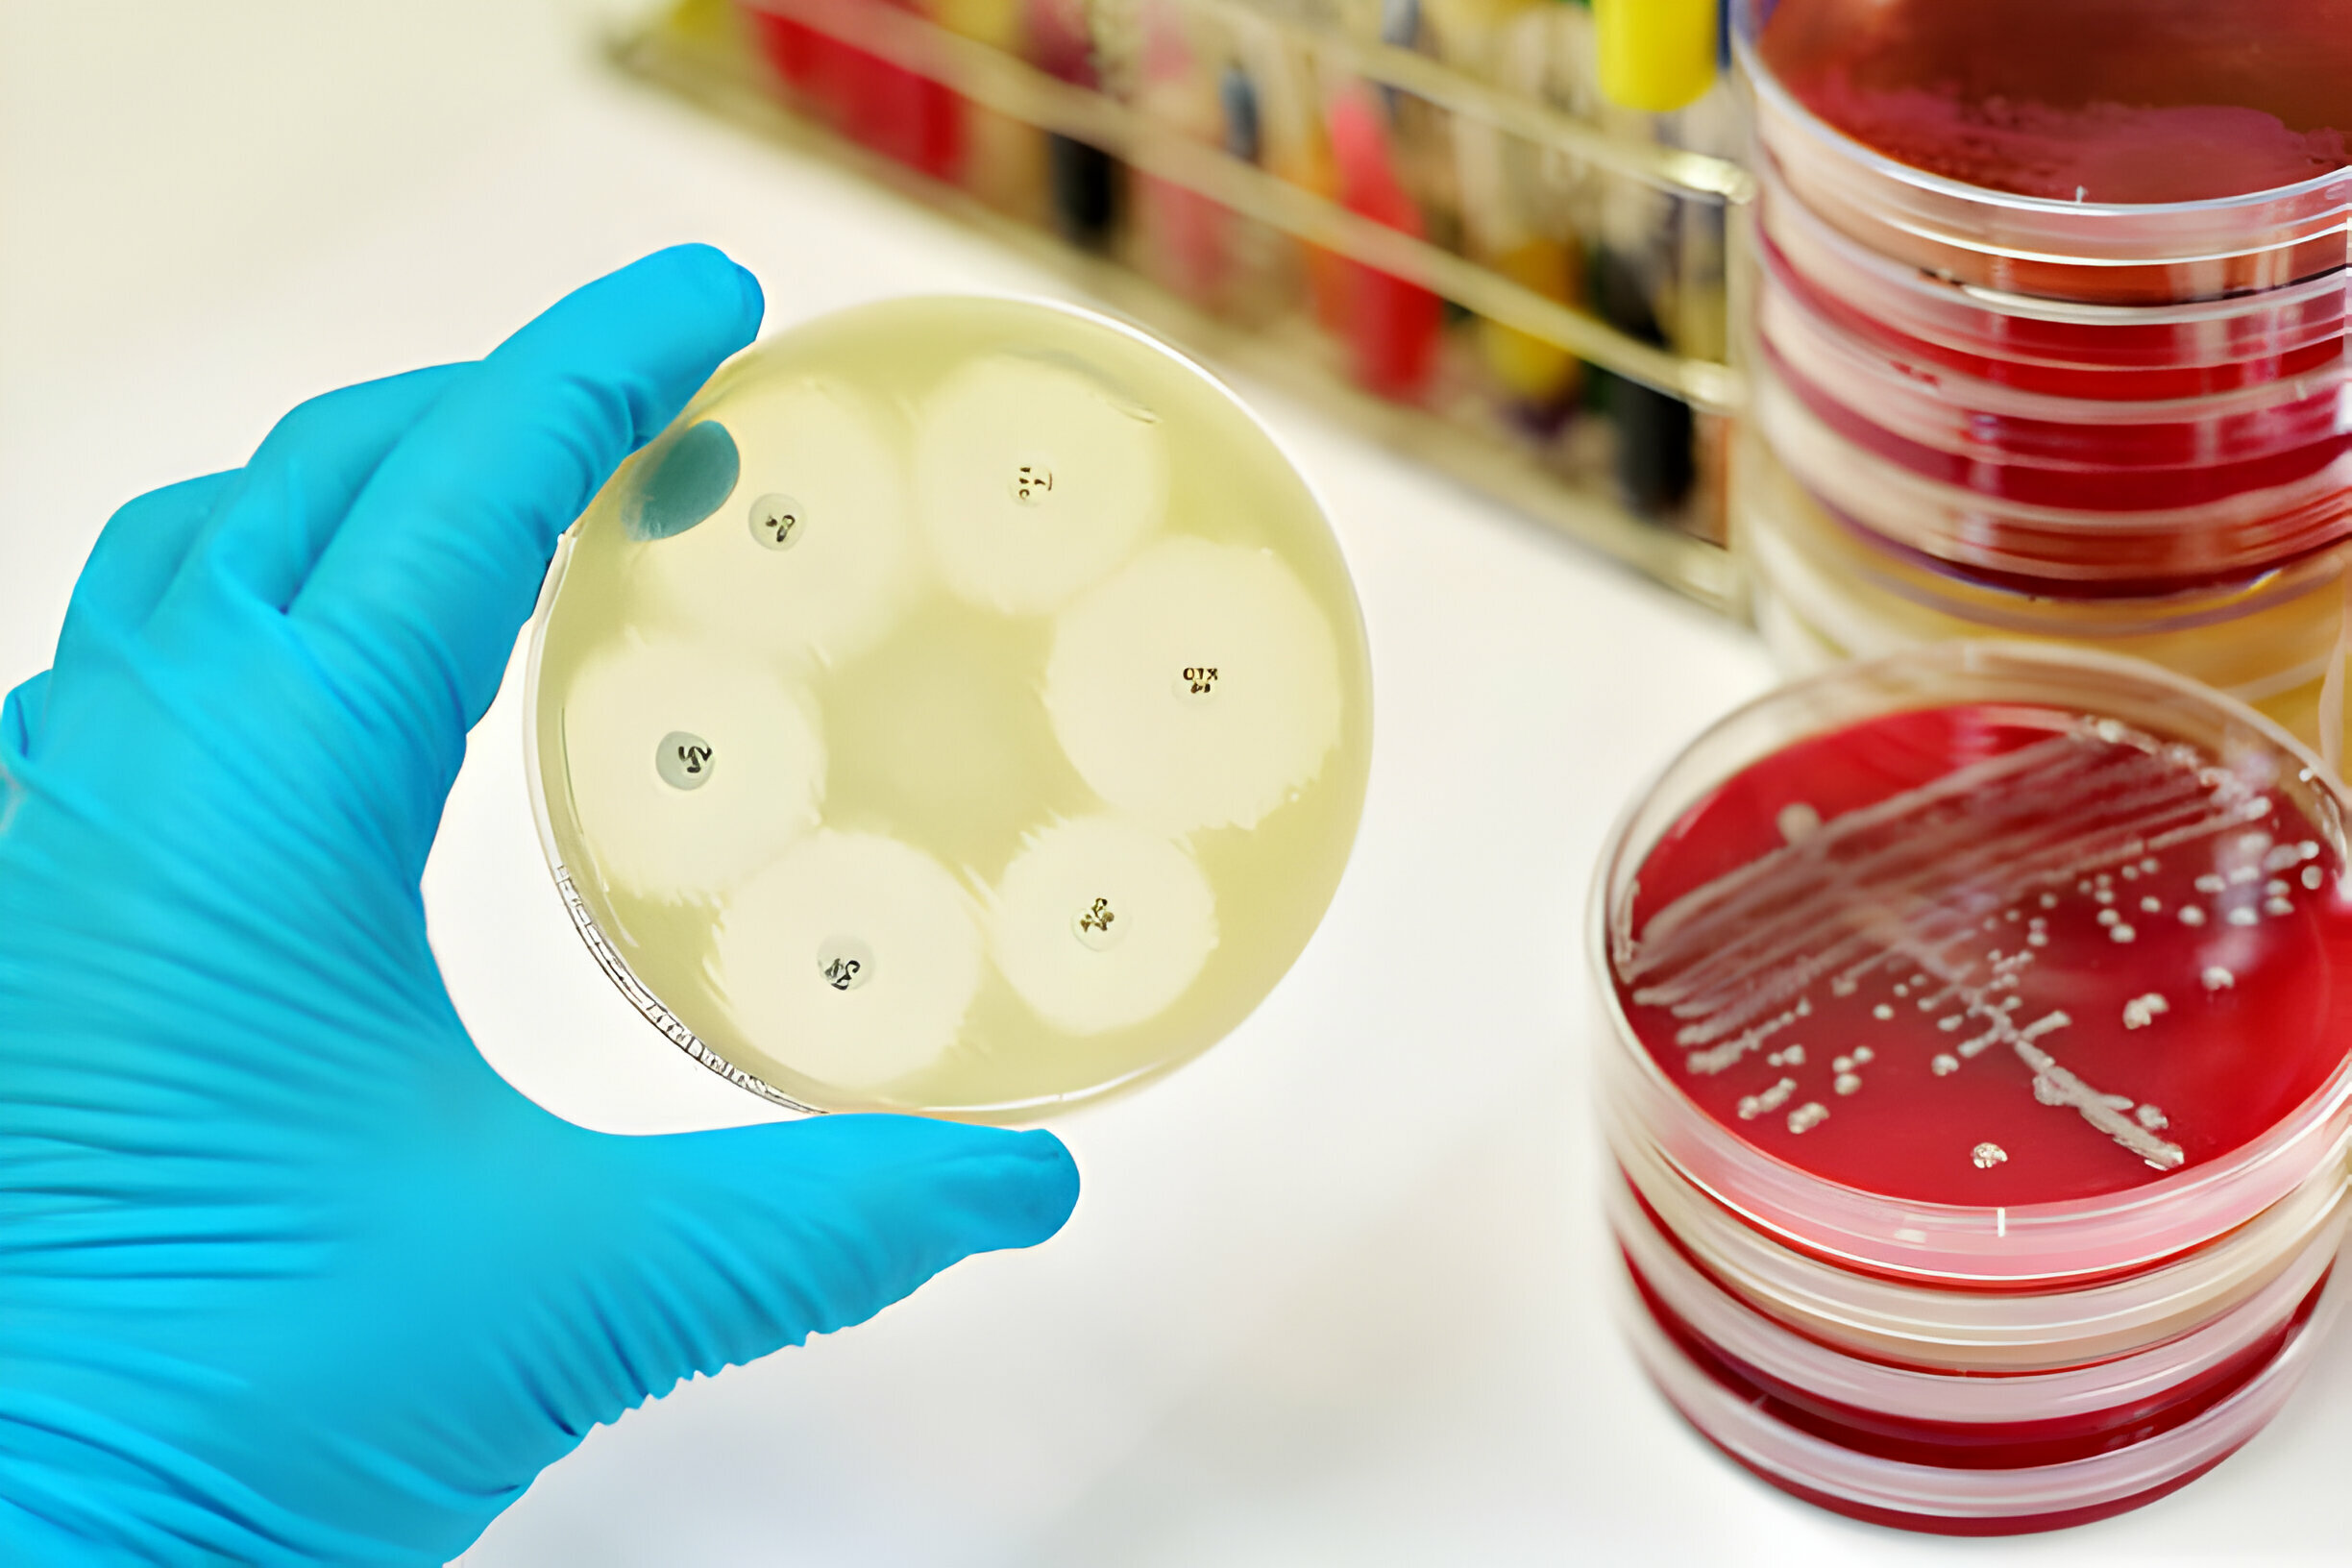 A Complete Guide to Doing an MRSA Swab Test